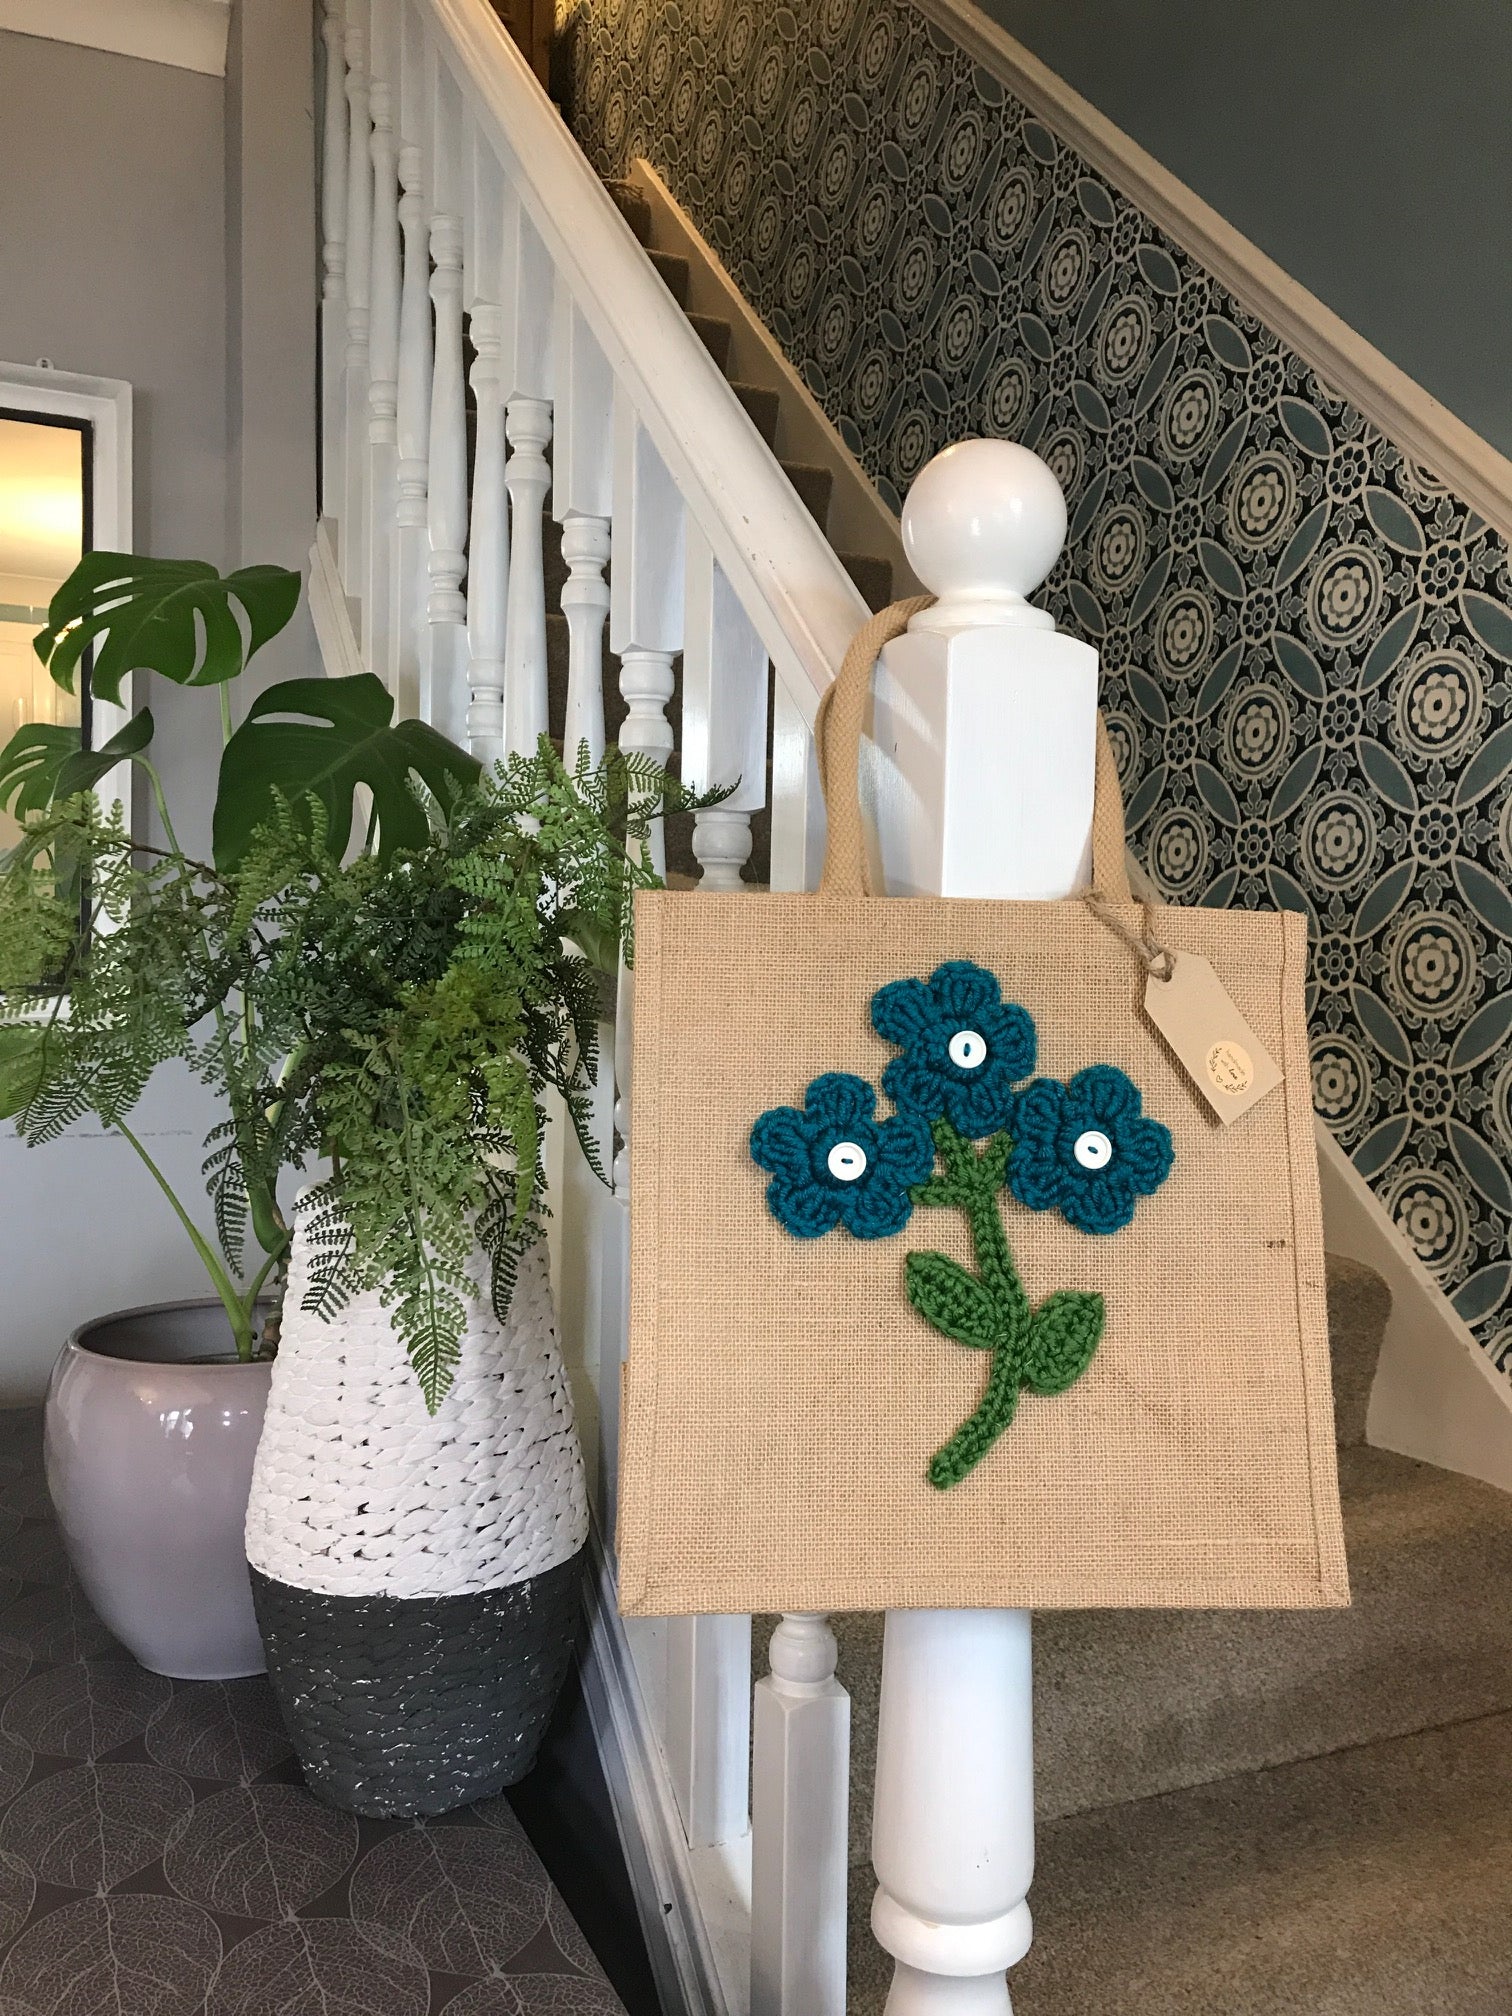 Gorgeous artisan jute bags with hand crafted crochet decoration.